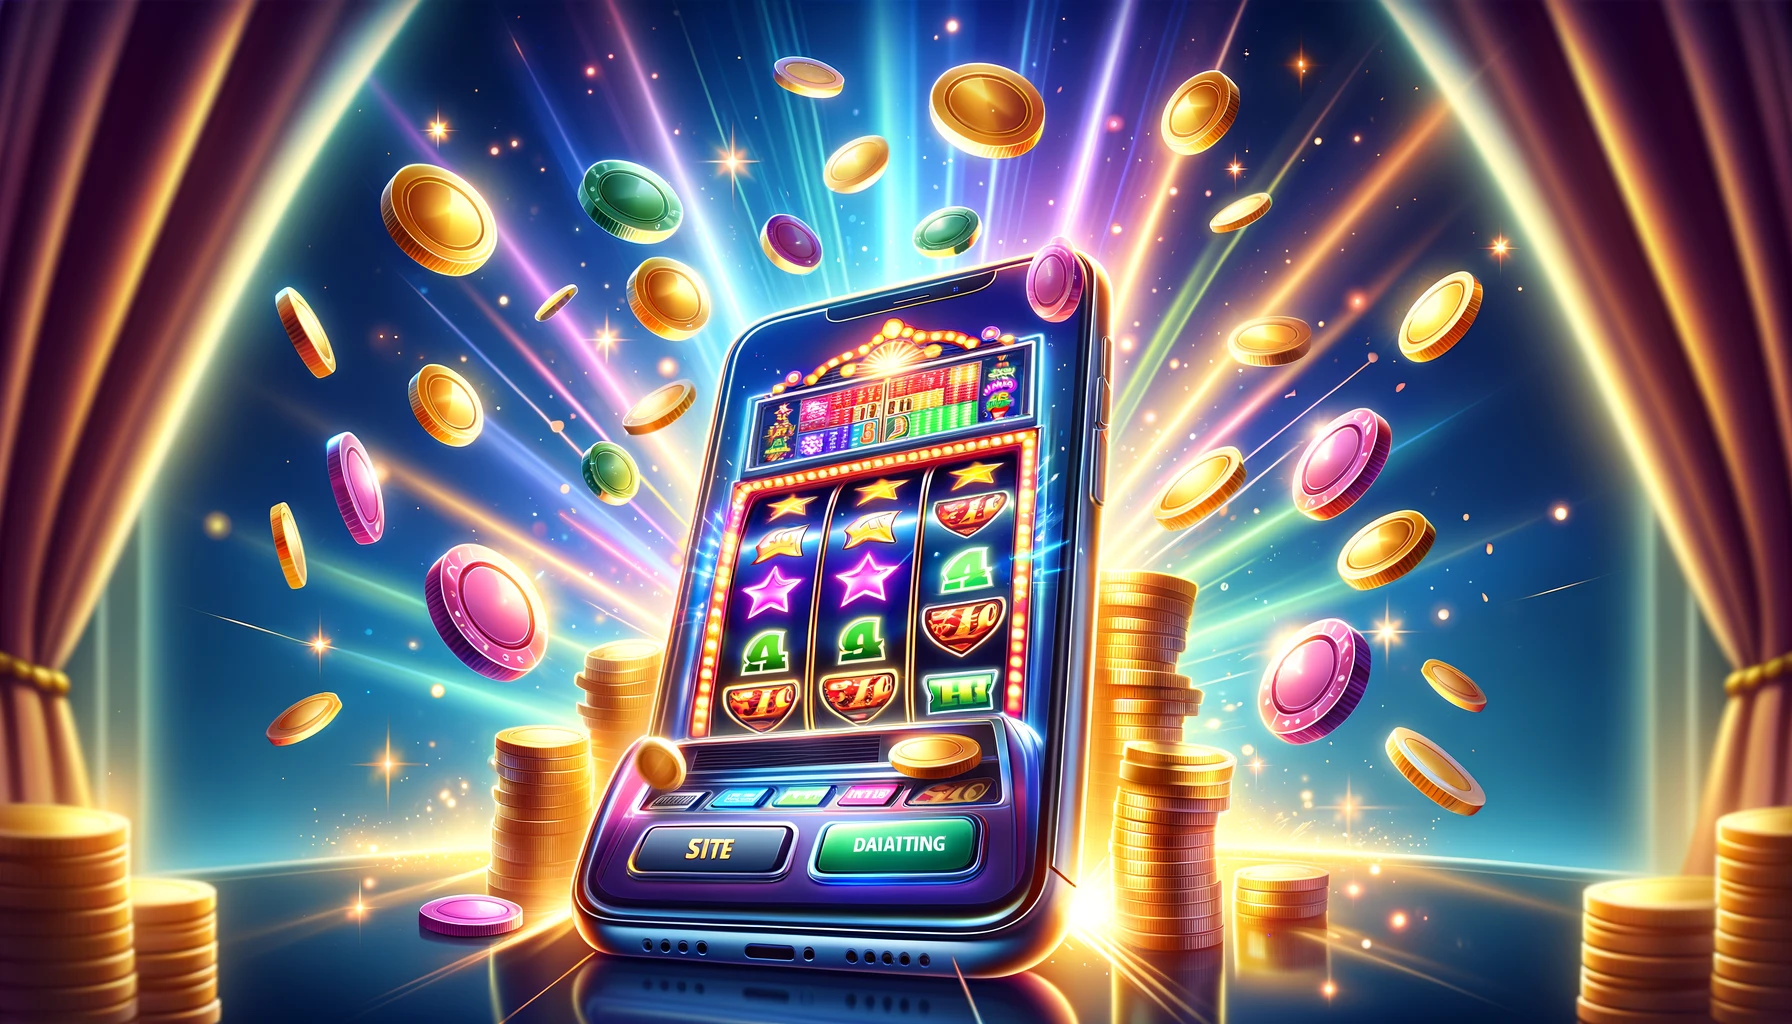 What Is the Number 1 Casino Game on the App Store?